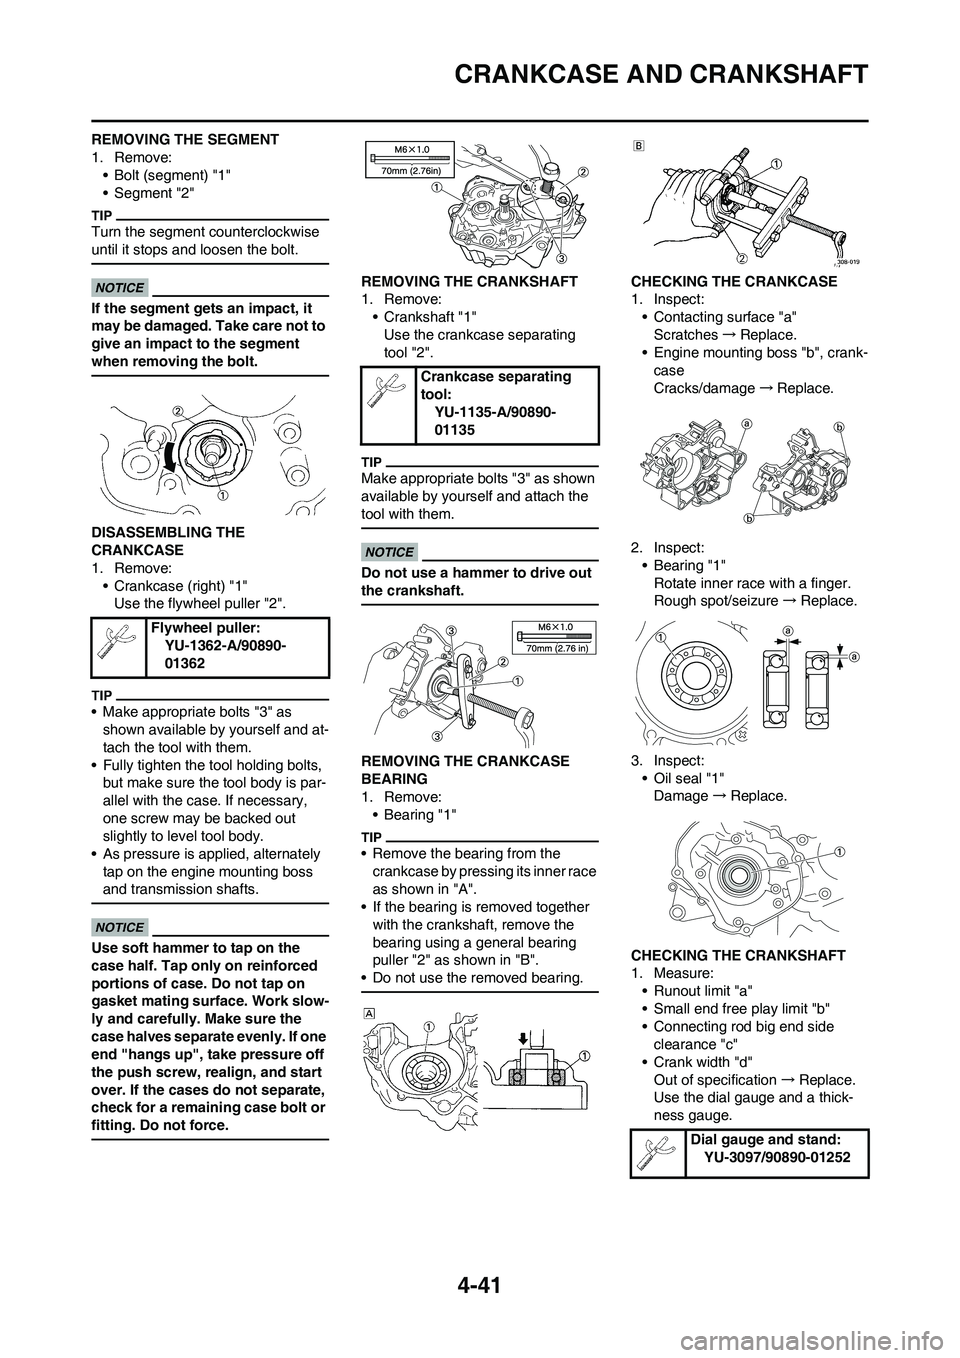 YAMAHA YZ125LC 2010  Owners Manual 4-41
CRANKCASE AND CRANKSHAFT
REMOVING THE SEGMENT
1. Remove:
• Bolt (segment) "1"
• Segment "2"
Turn the segment counterclockwise 
until it stops and loosen the bolt.
If the segment gets an impac